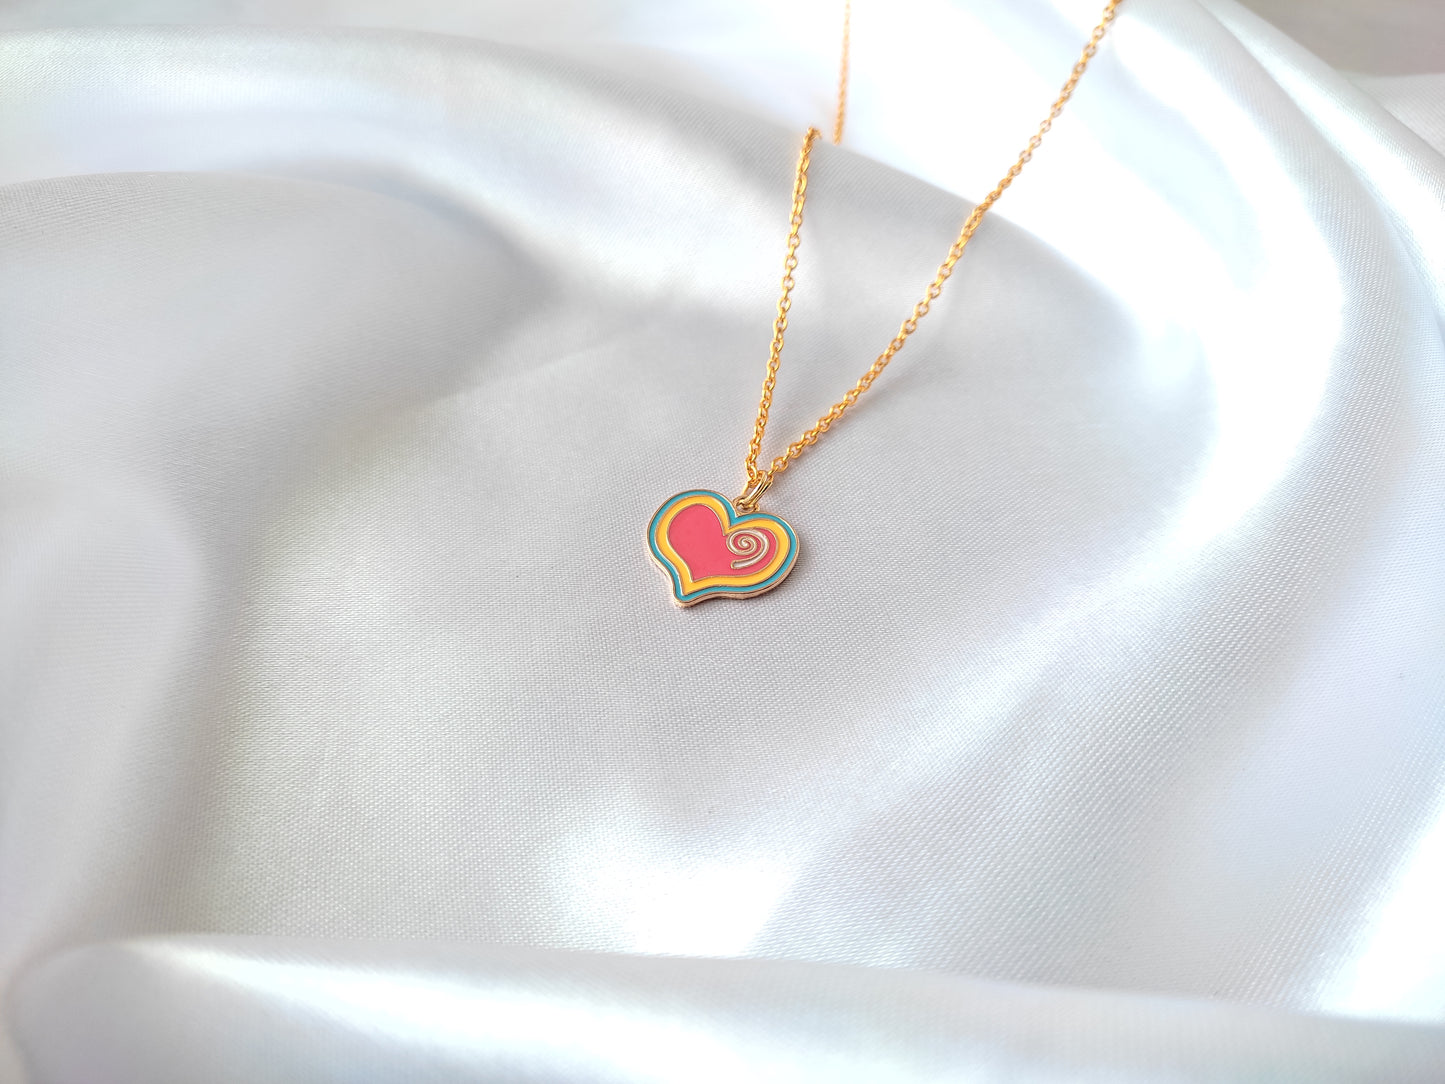 Cute heart pendant necklace for women and girls